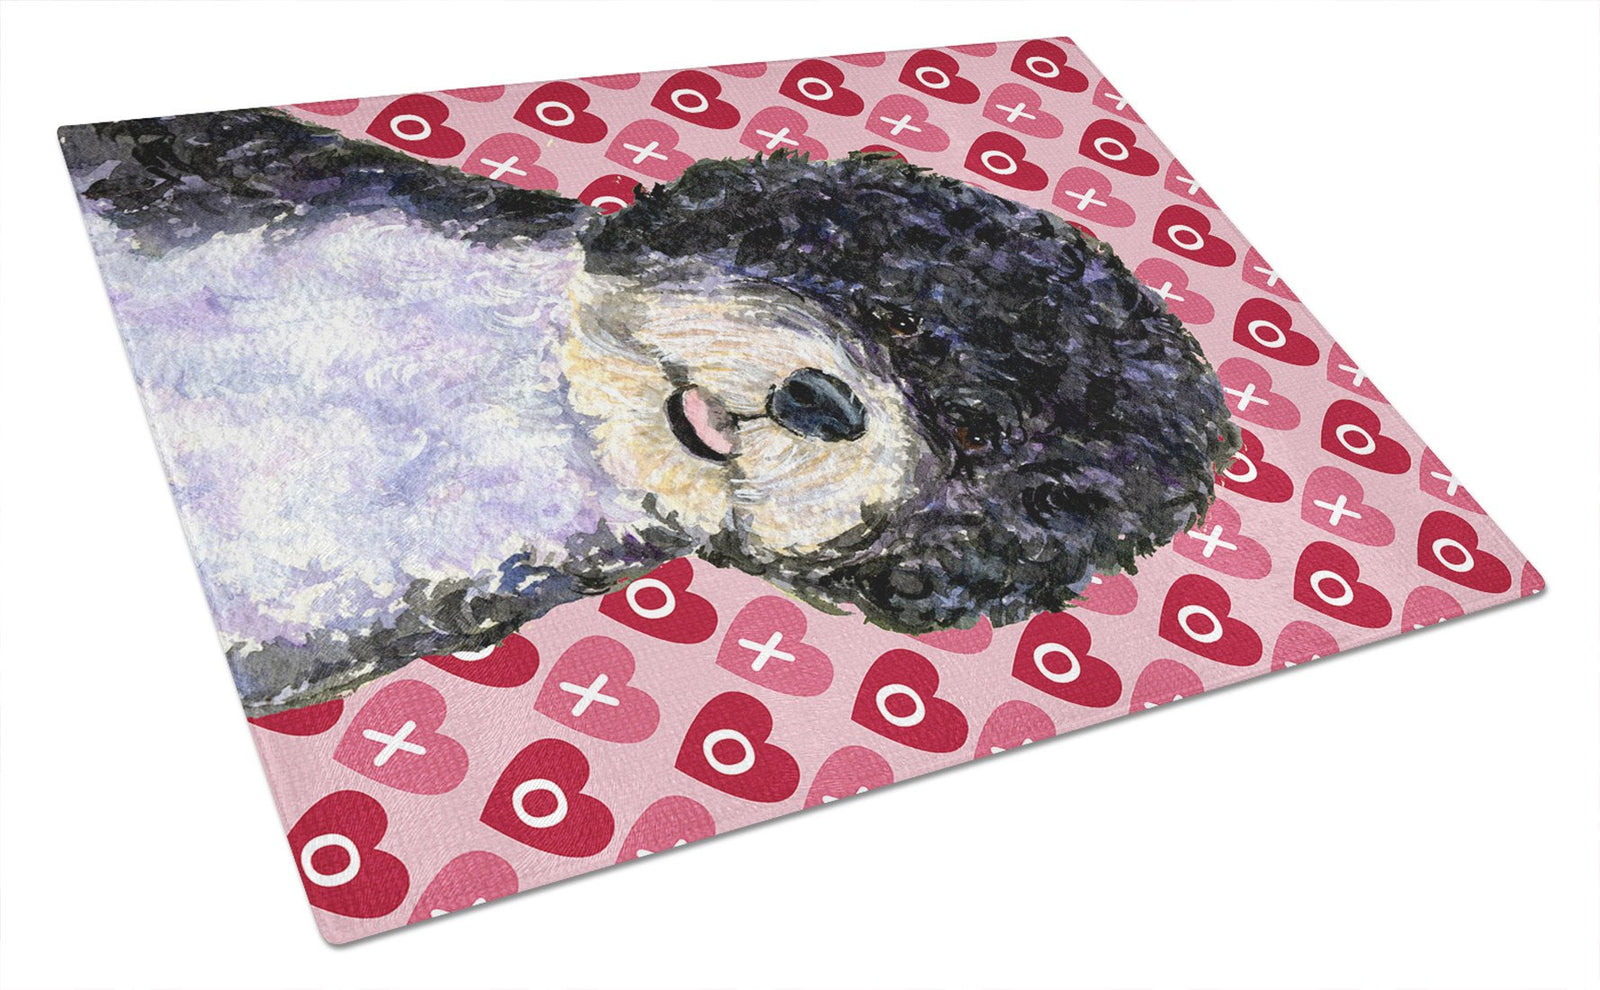 Portuguese Water Dog Hearts Love and Valentine's Day Glass Cutting Board Large by Caroline's Treasures